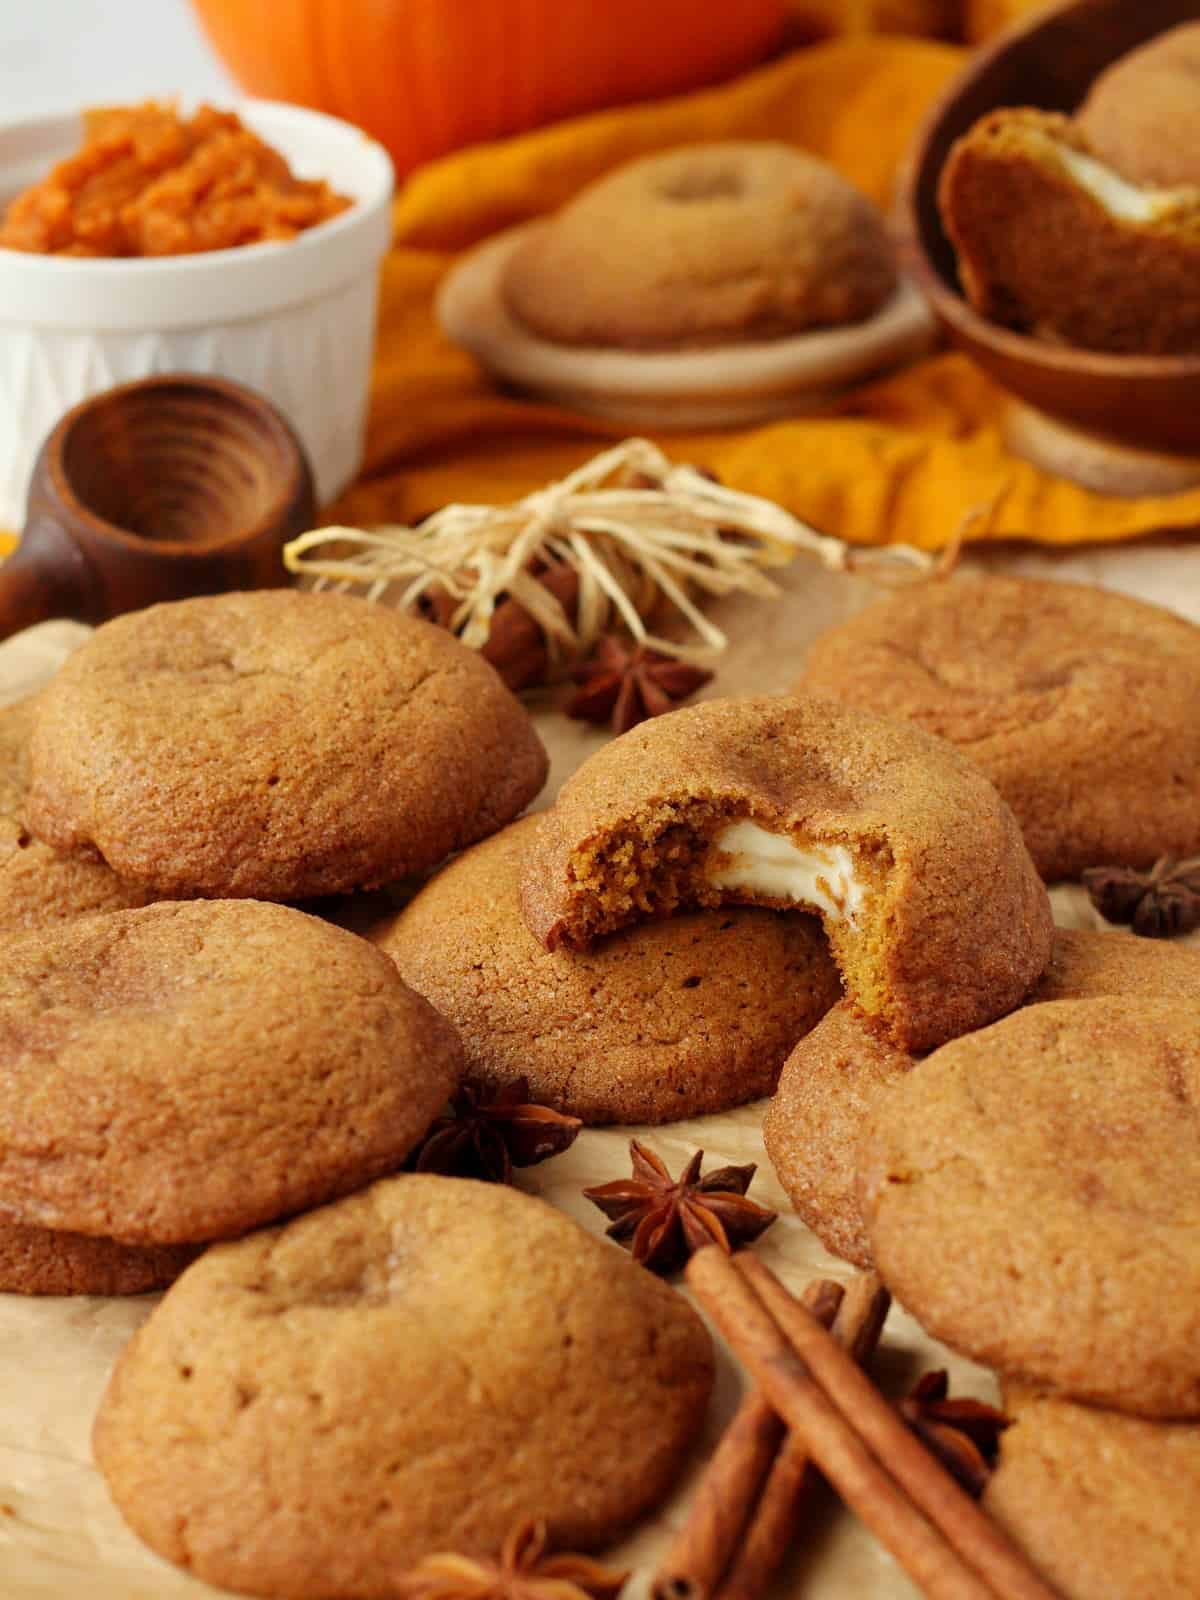 Pumpkin cheesecake cookies scattered on brown parchment paper with pumpkin pure & cinnamon sticks in background